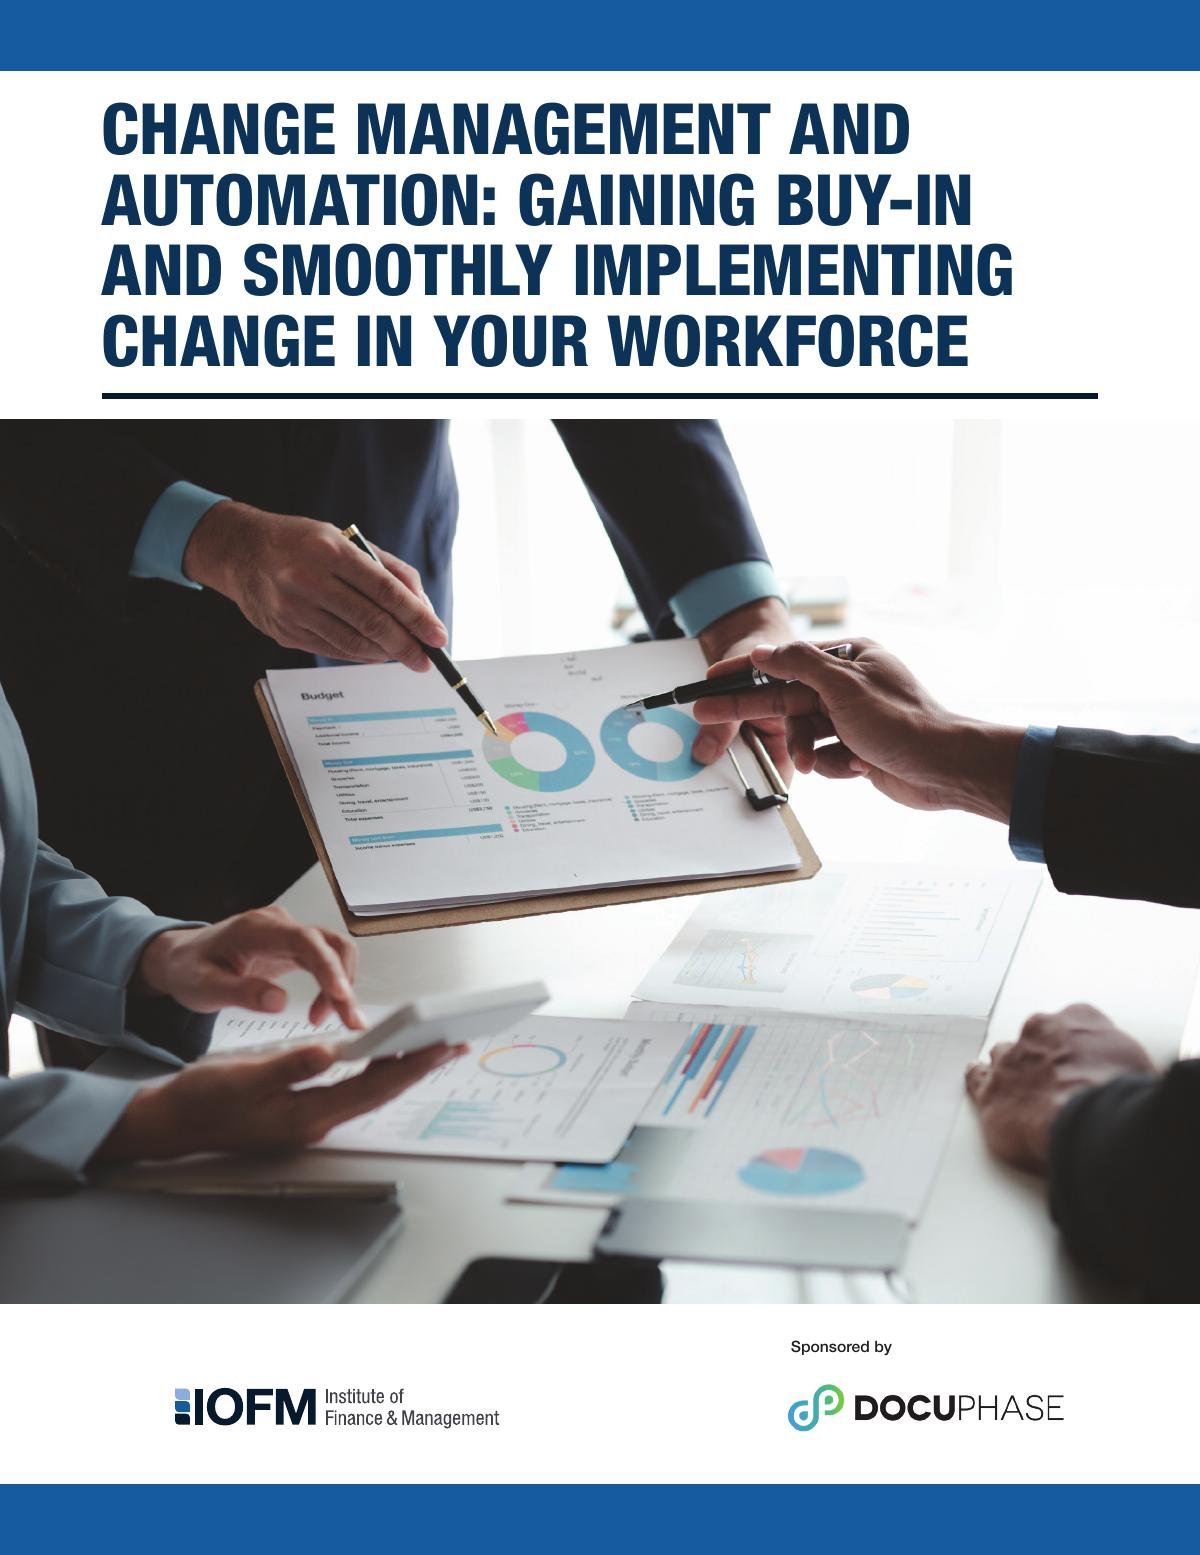 Change Management and Automation: Gaining Buy-in and Smoothly Implementing Change in Your Workforce